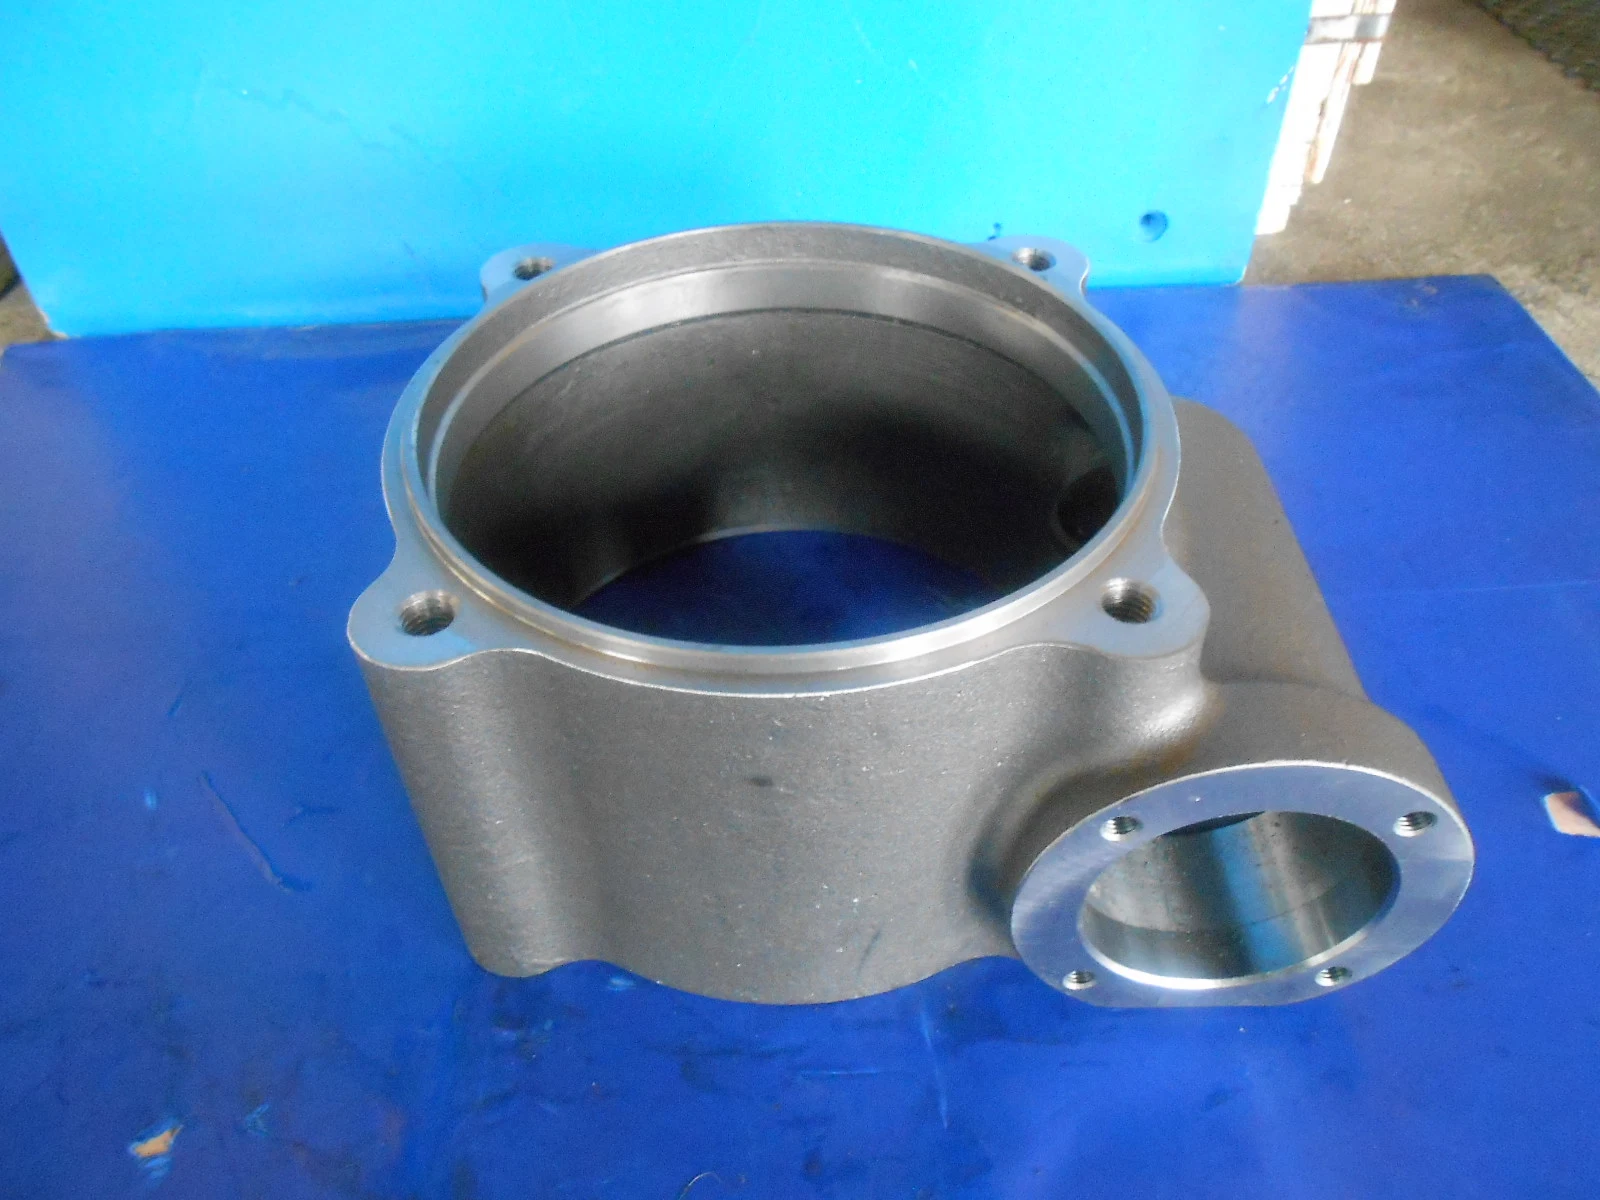 Stainless Steel Investment Casting Equipment Machinery Components Made by Lost Wax Casting